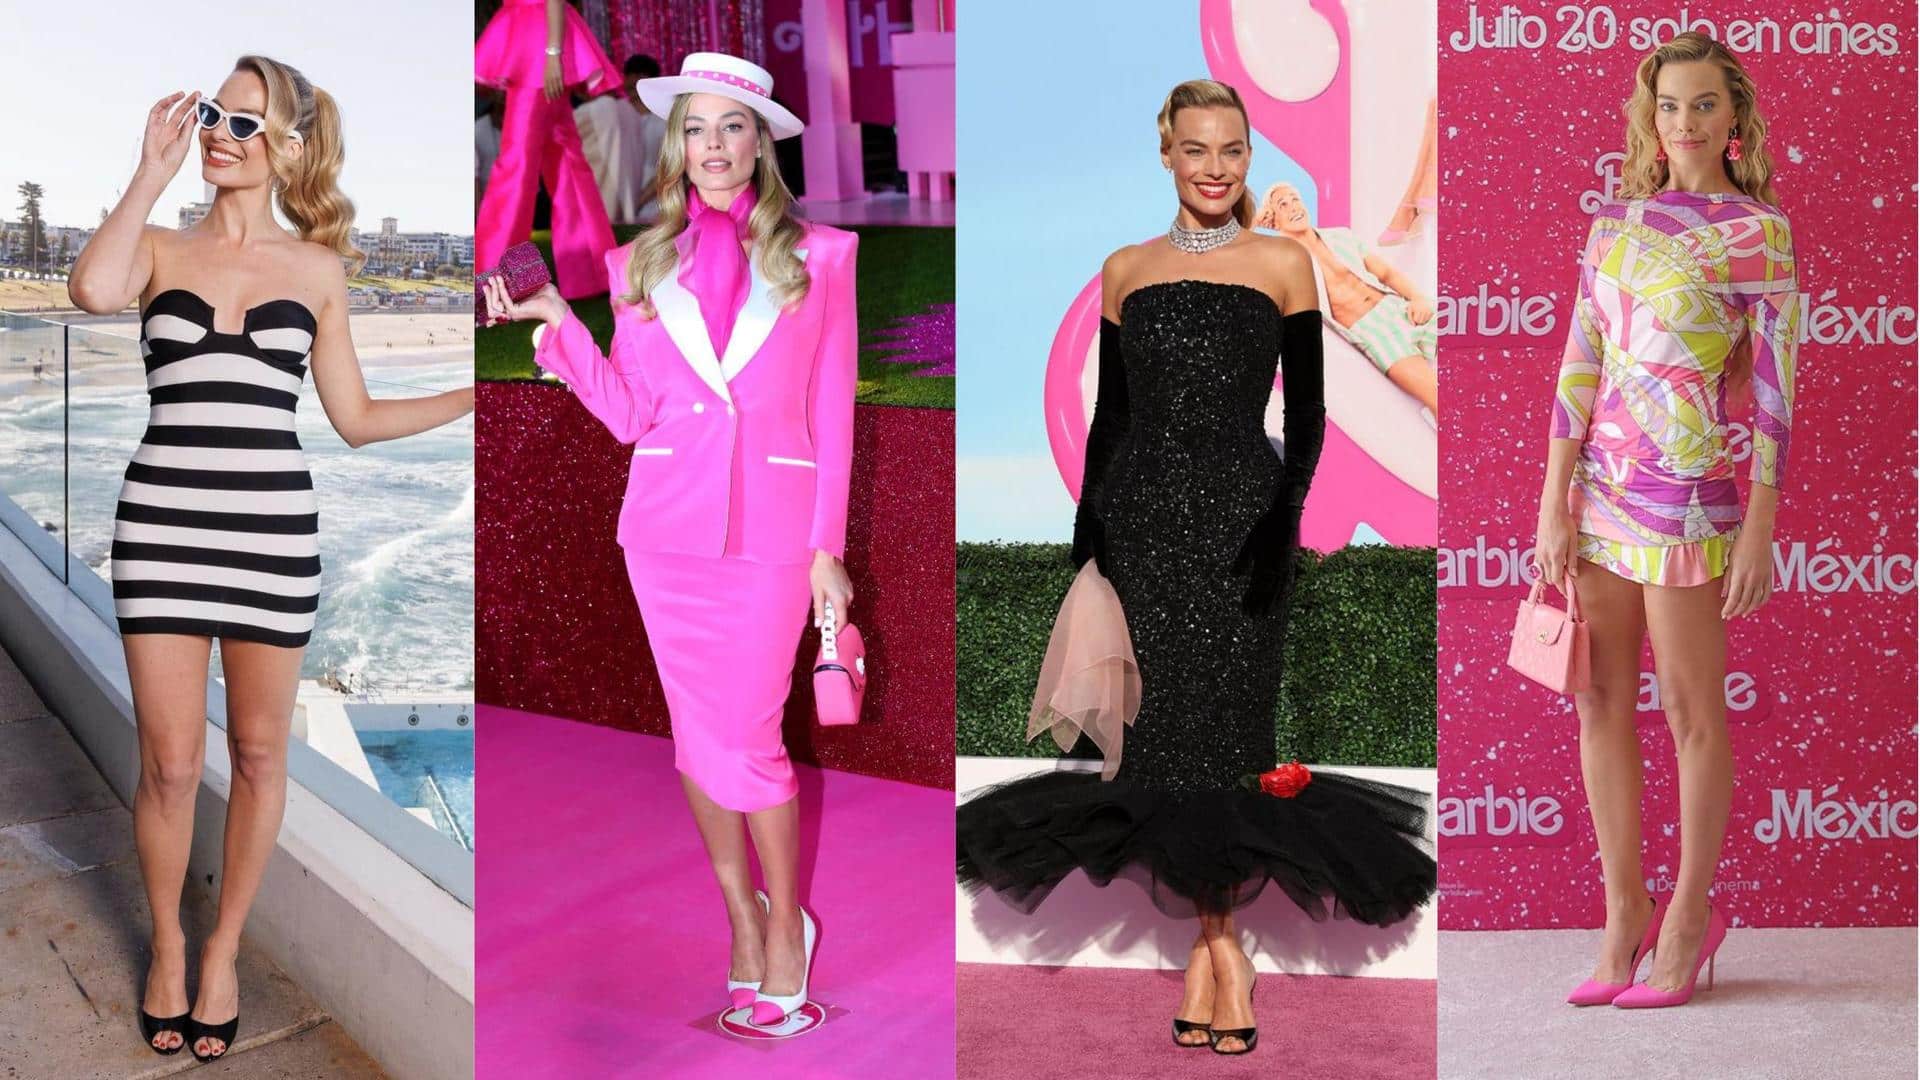 Ahead of 'Barbie' release, here's Margot Robbie's most stunning looks